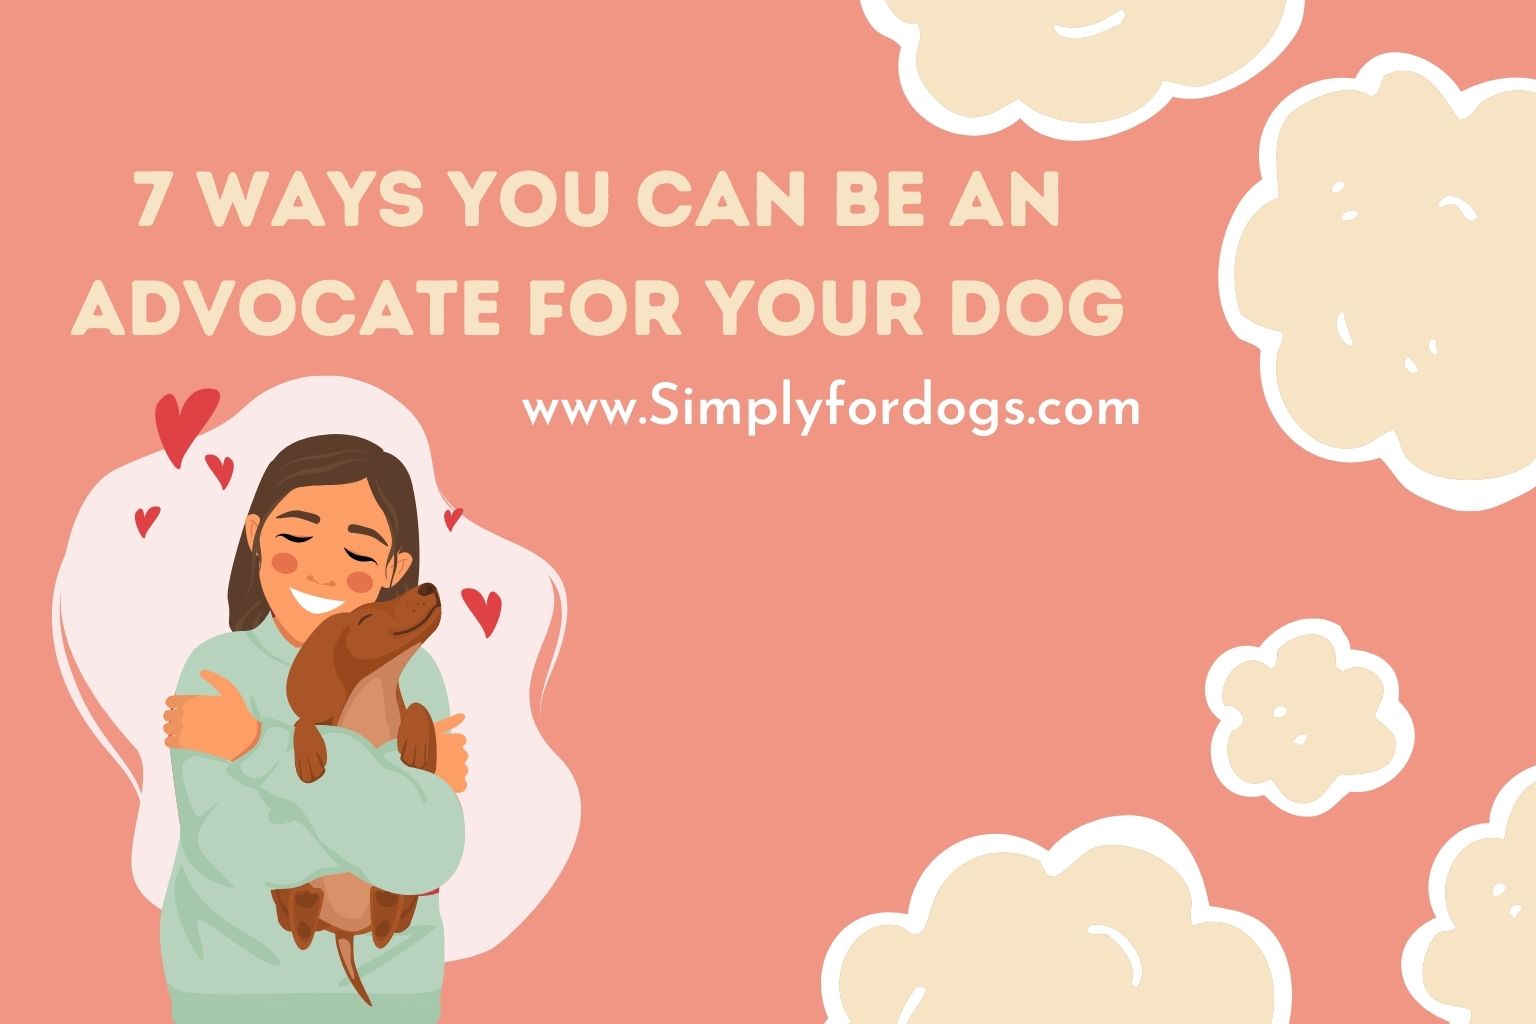 7 Ways You Can Be an Advocate for Your Dog